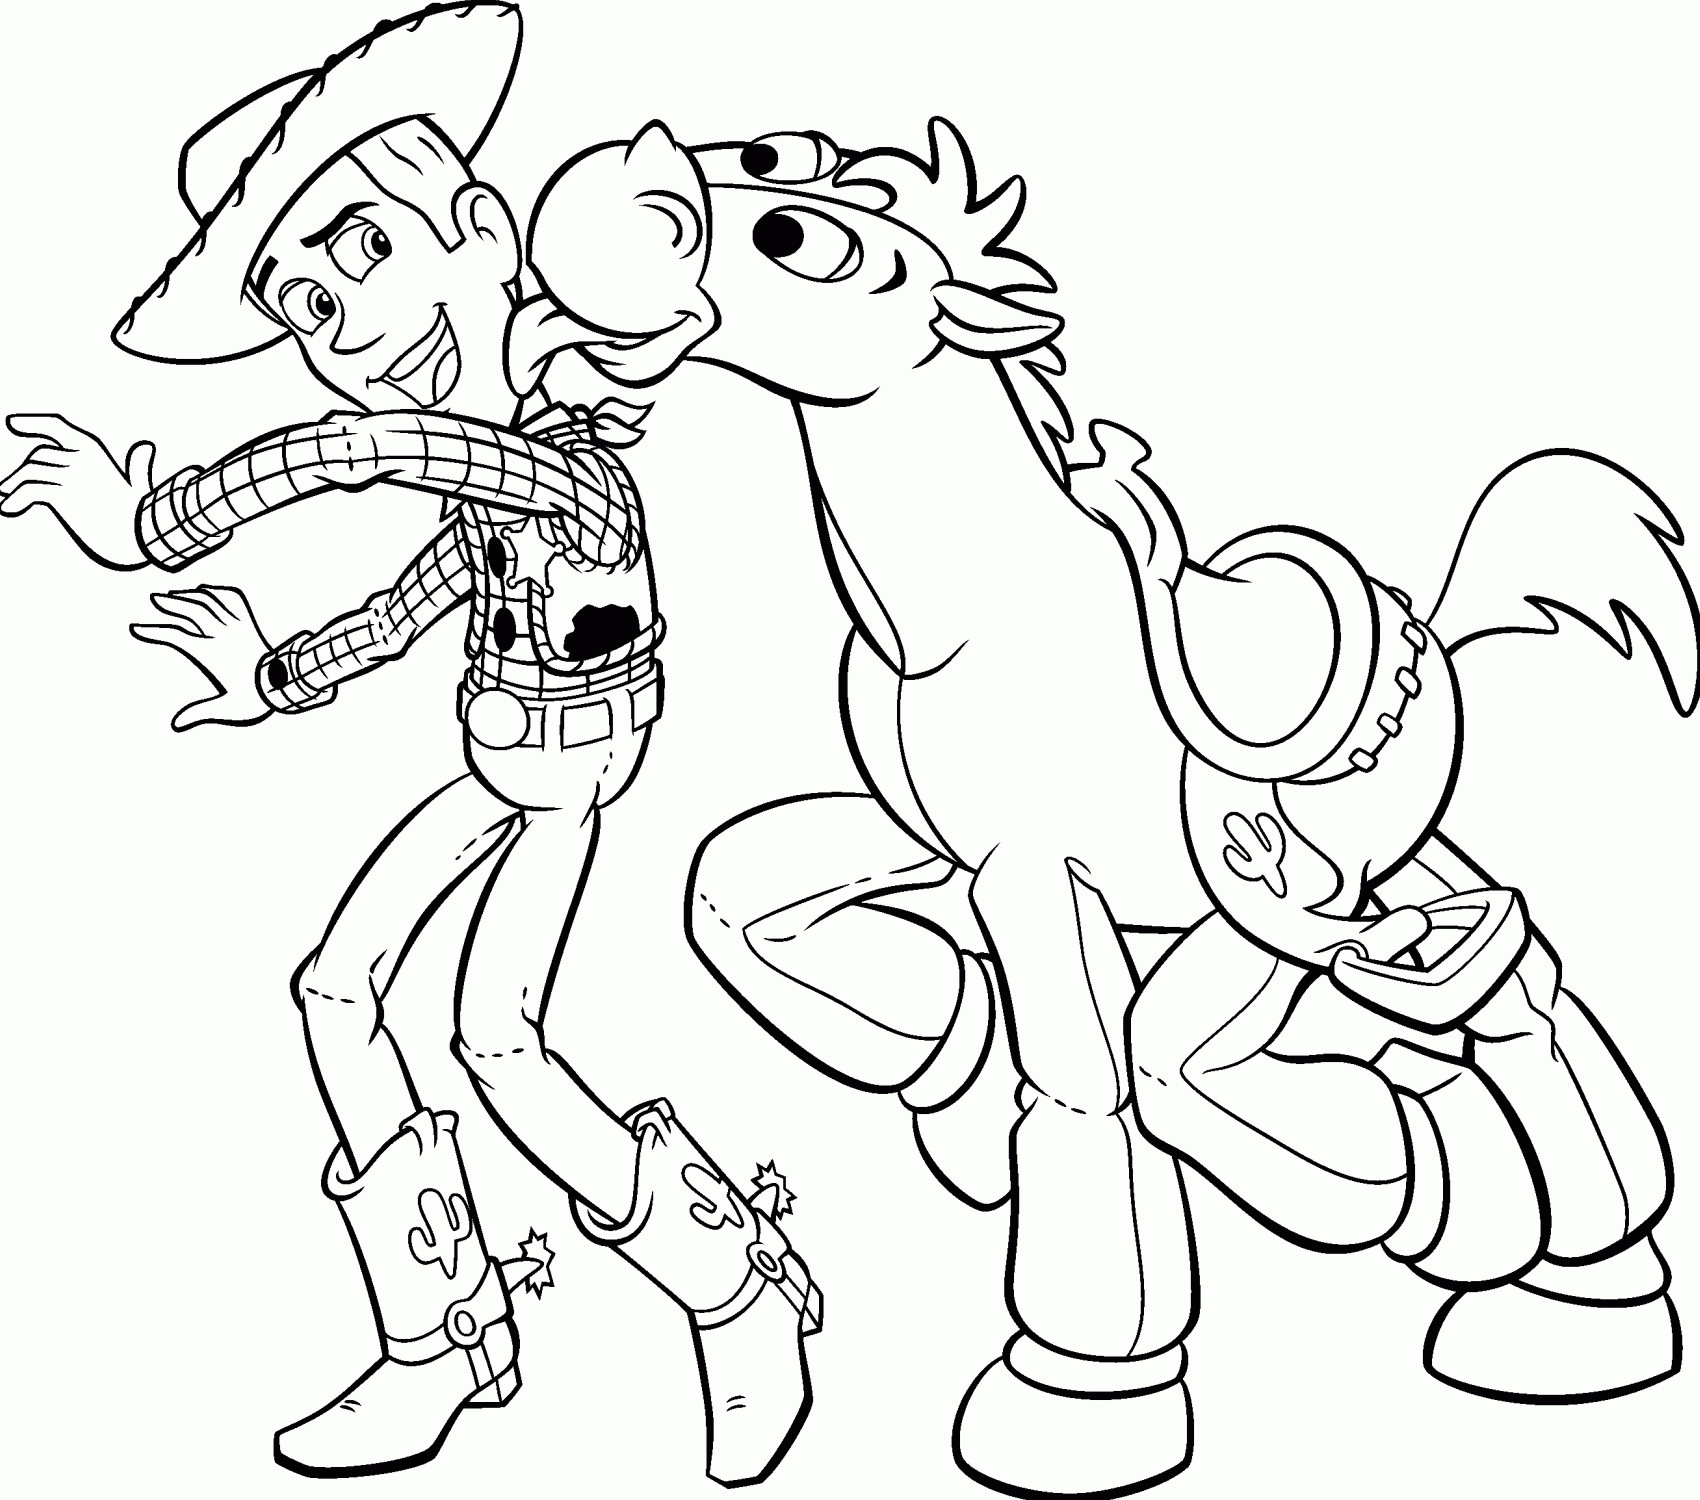 Coloring Pages For Kids Pdf
 Disney Coloring Pages Pdf Coloring Home